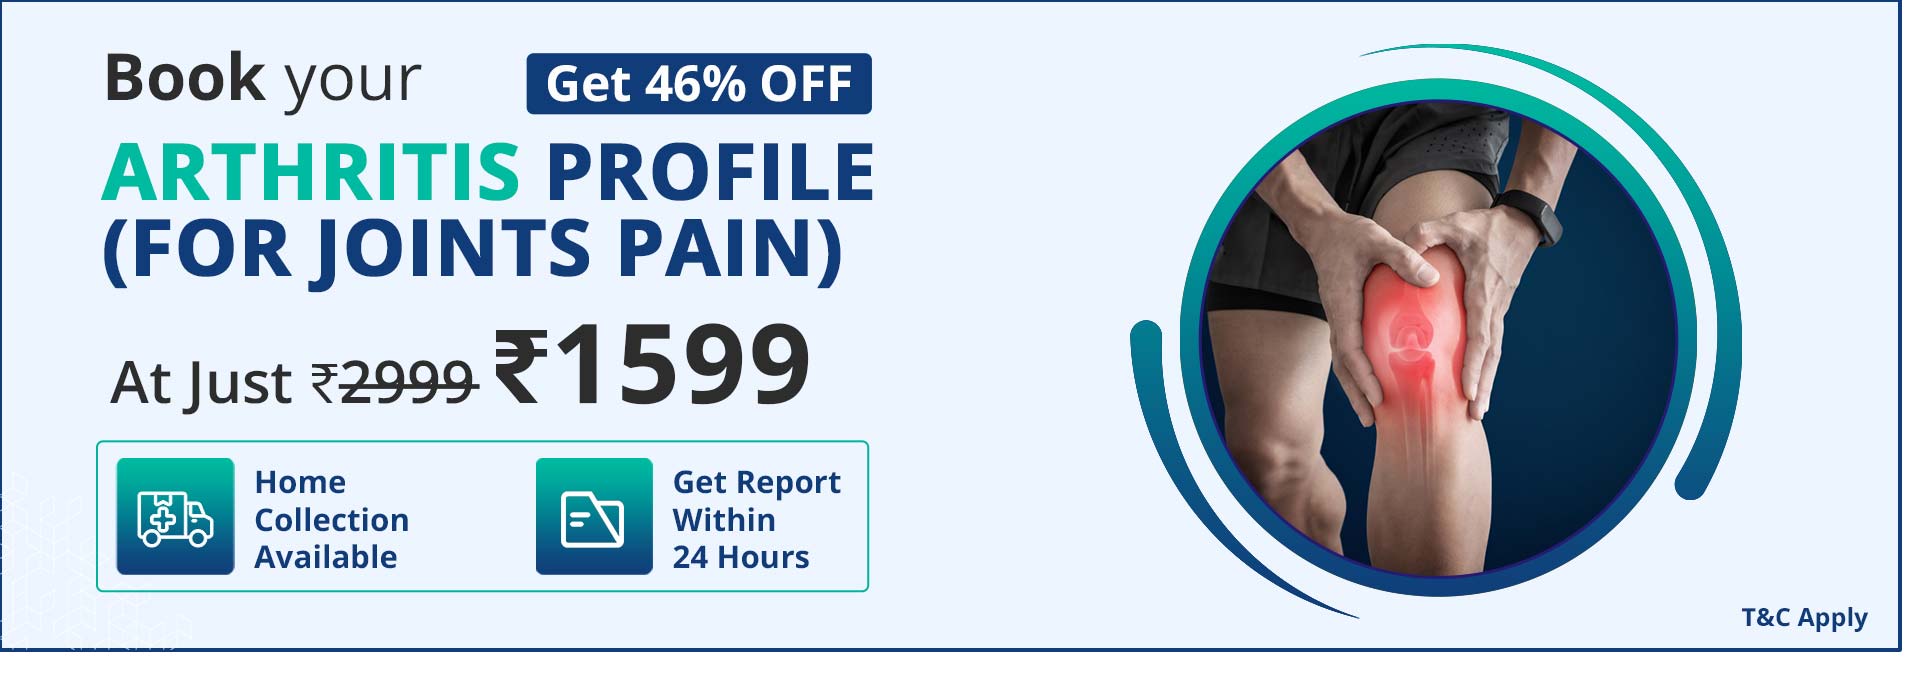 Arthritis Profile (For Joints Pain)